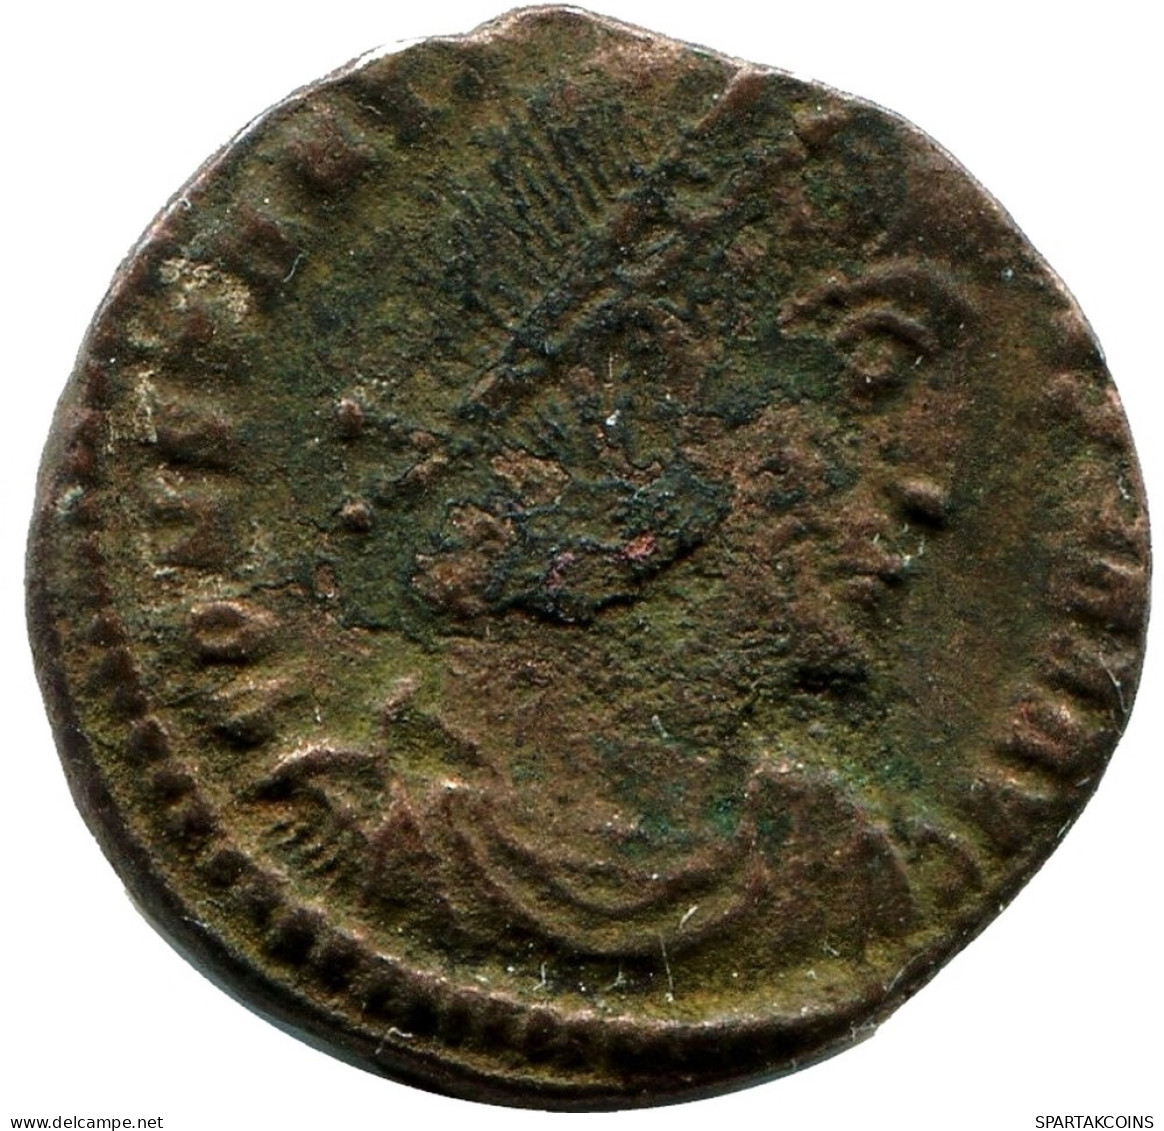 CONSTANTINE I MINTED IN CYZICUS FROM THE ROYAL ONTARIO MUSEUM #ANC10988.14.E.A - The Christian Empire (307 AD To 363 AD)